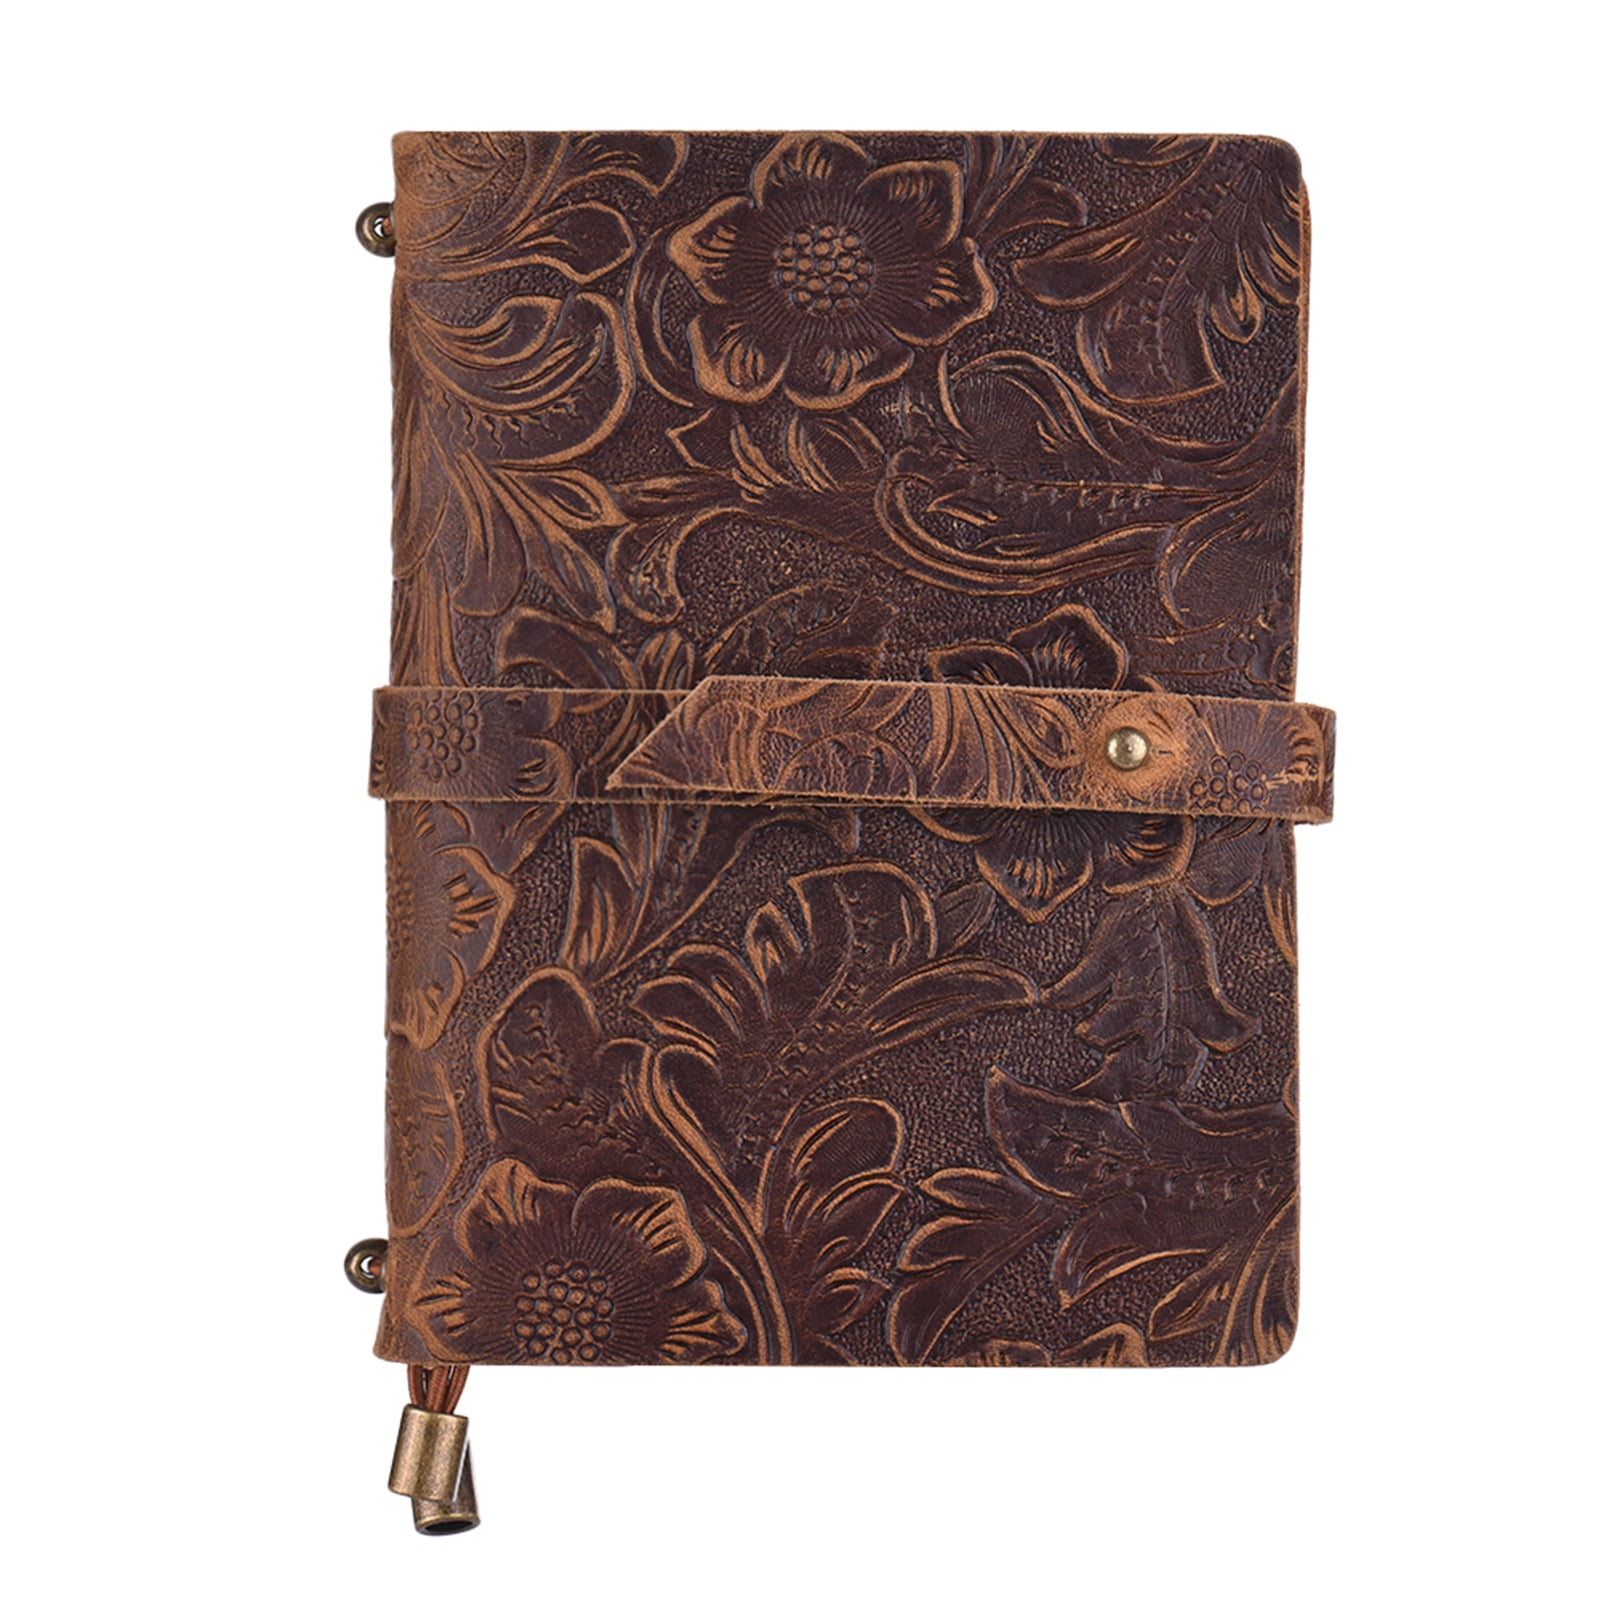 US 4.5 x 6 Inch Leather Vintage Handmade Journal Diary with Lock 